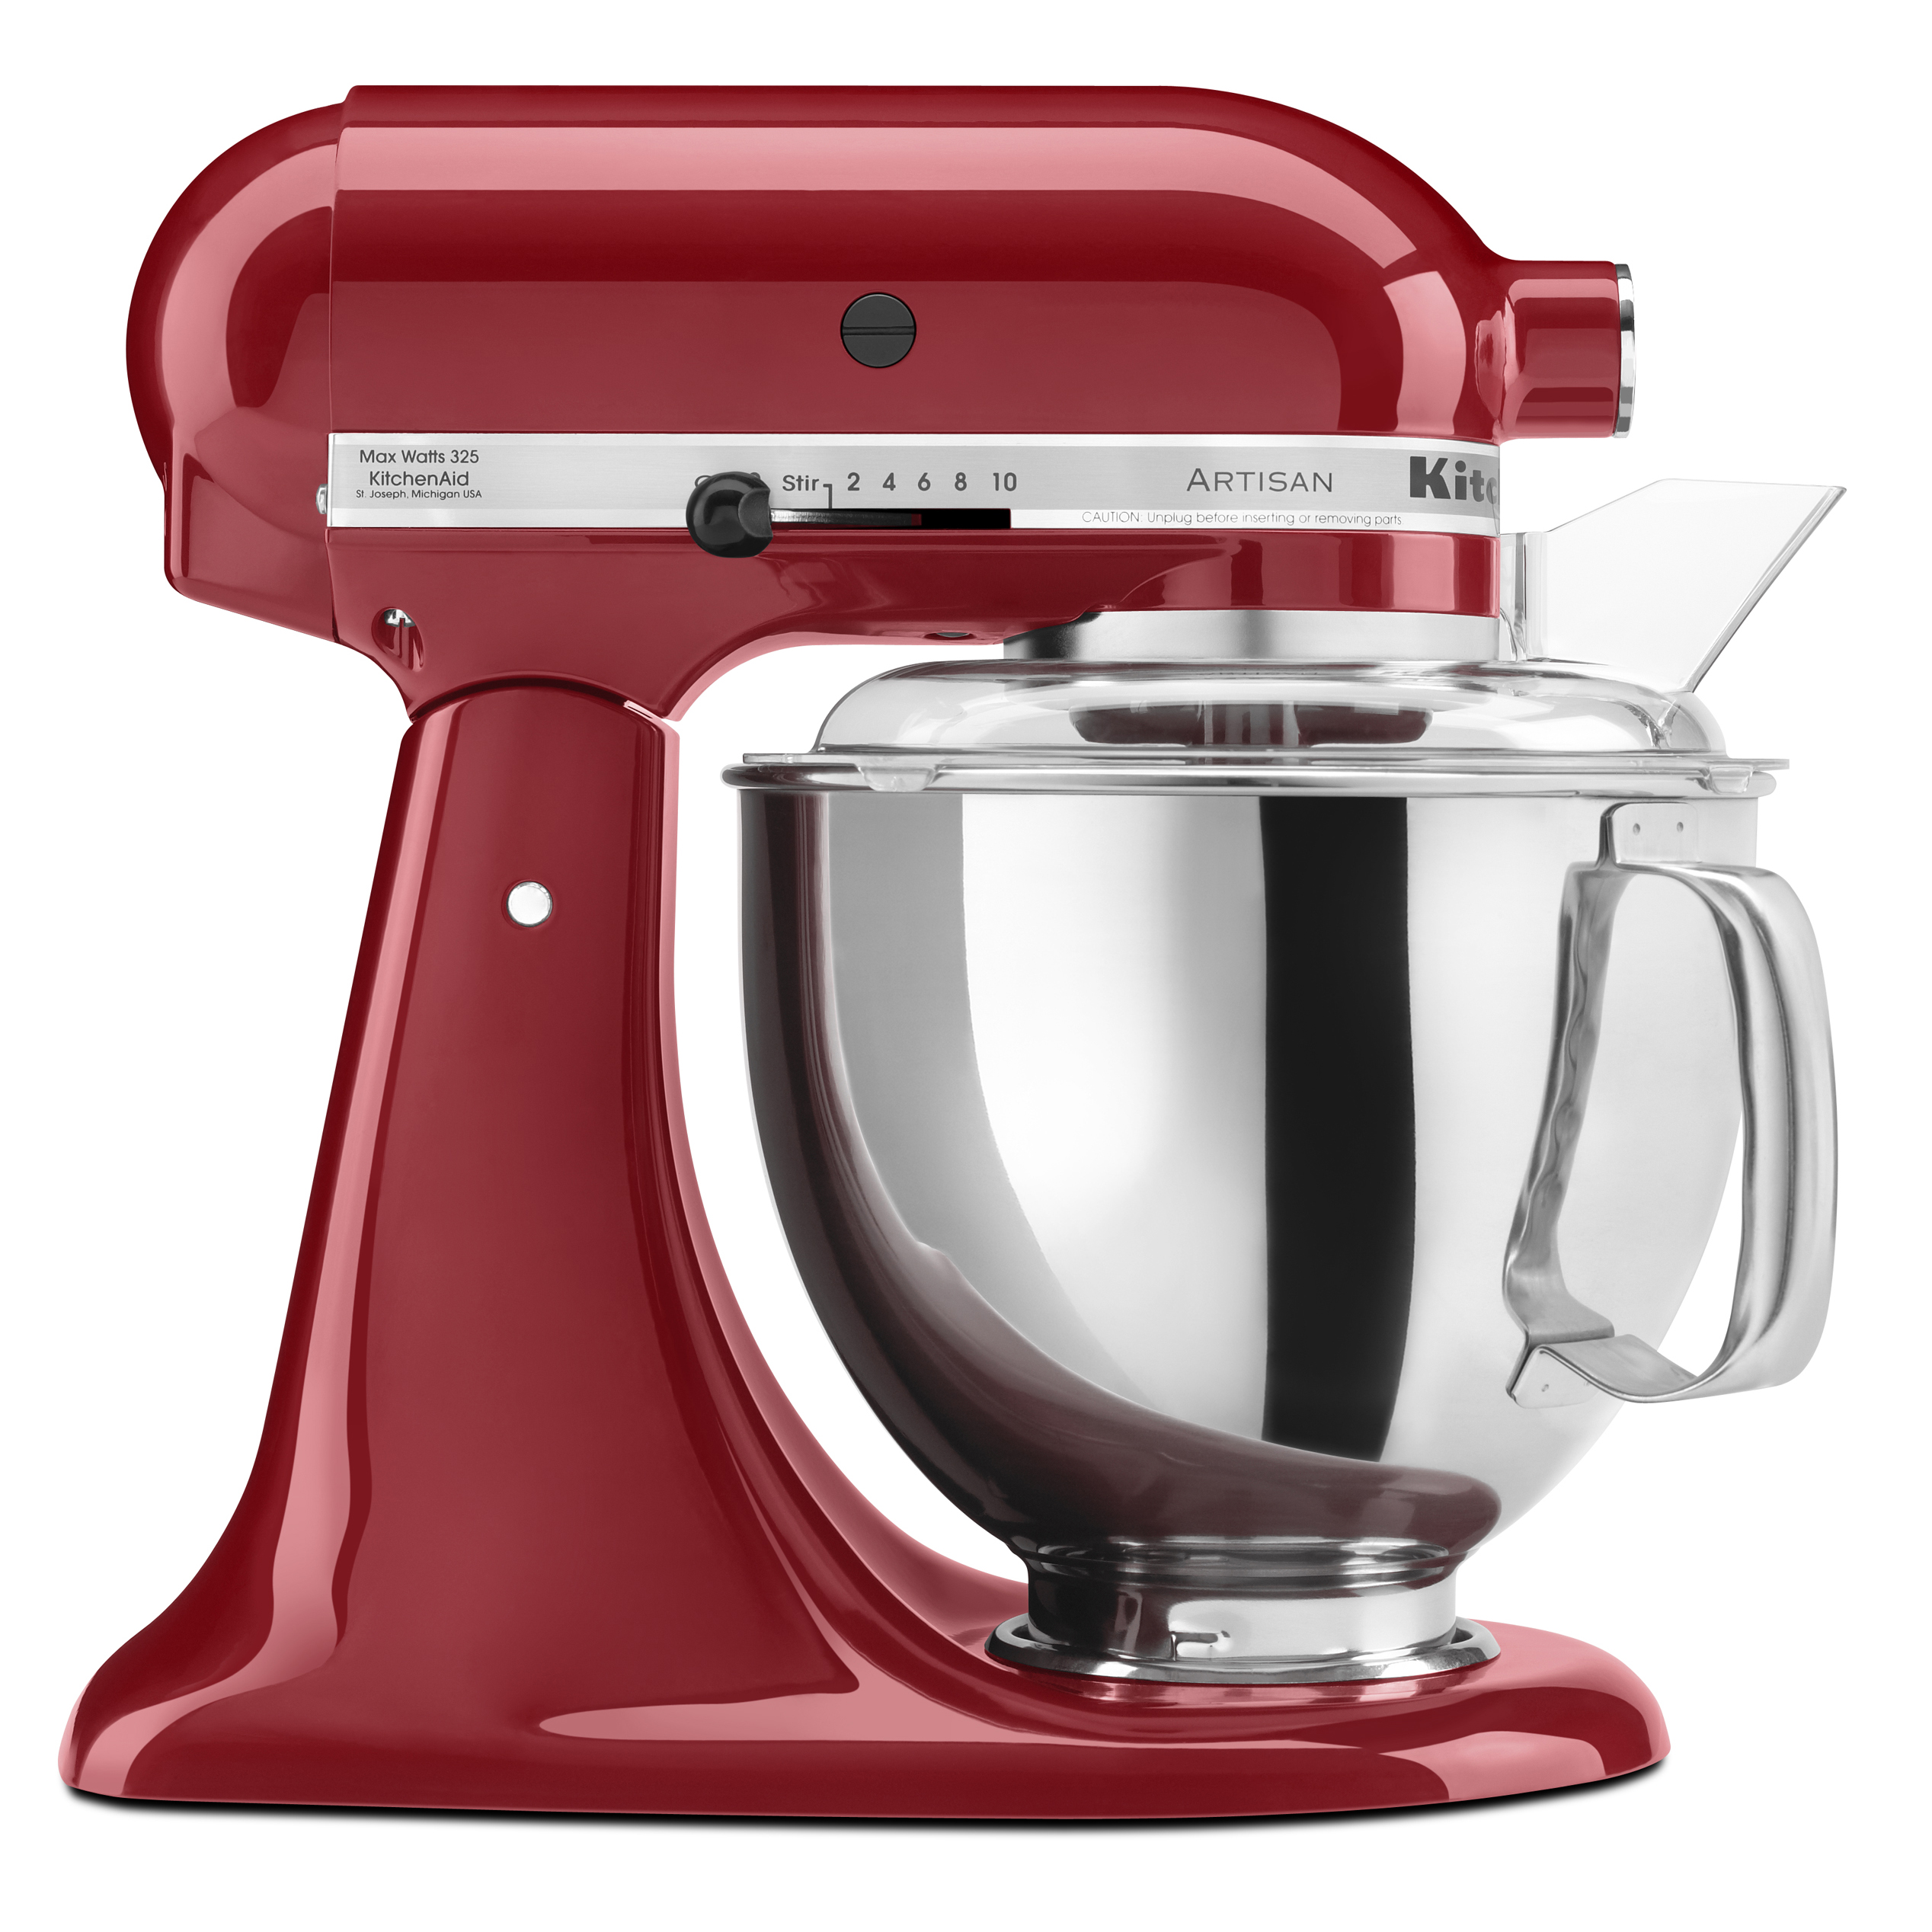 KitchenAid Mixer Black Friday Sale: Get It At Best Buy for $200